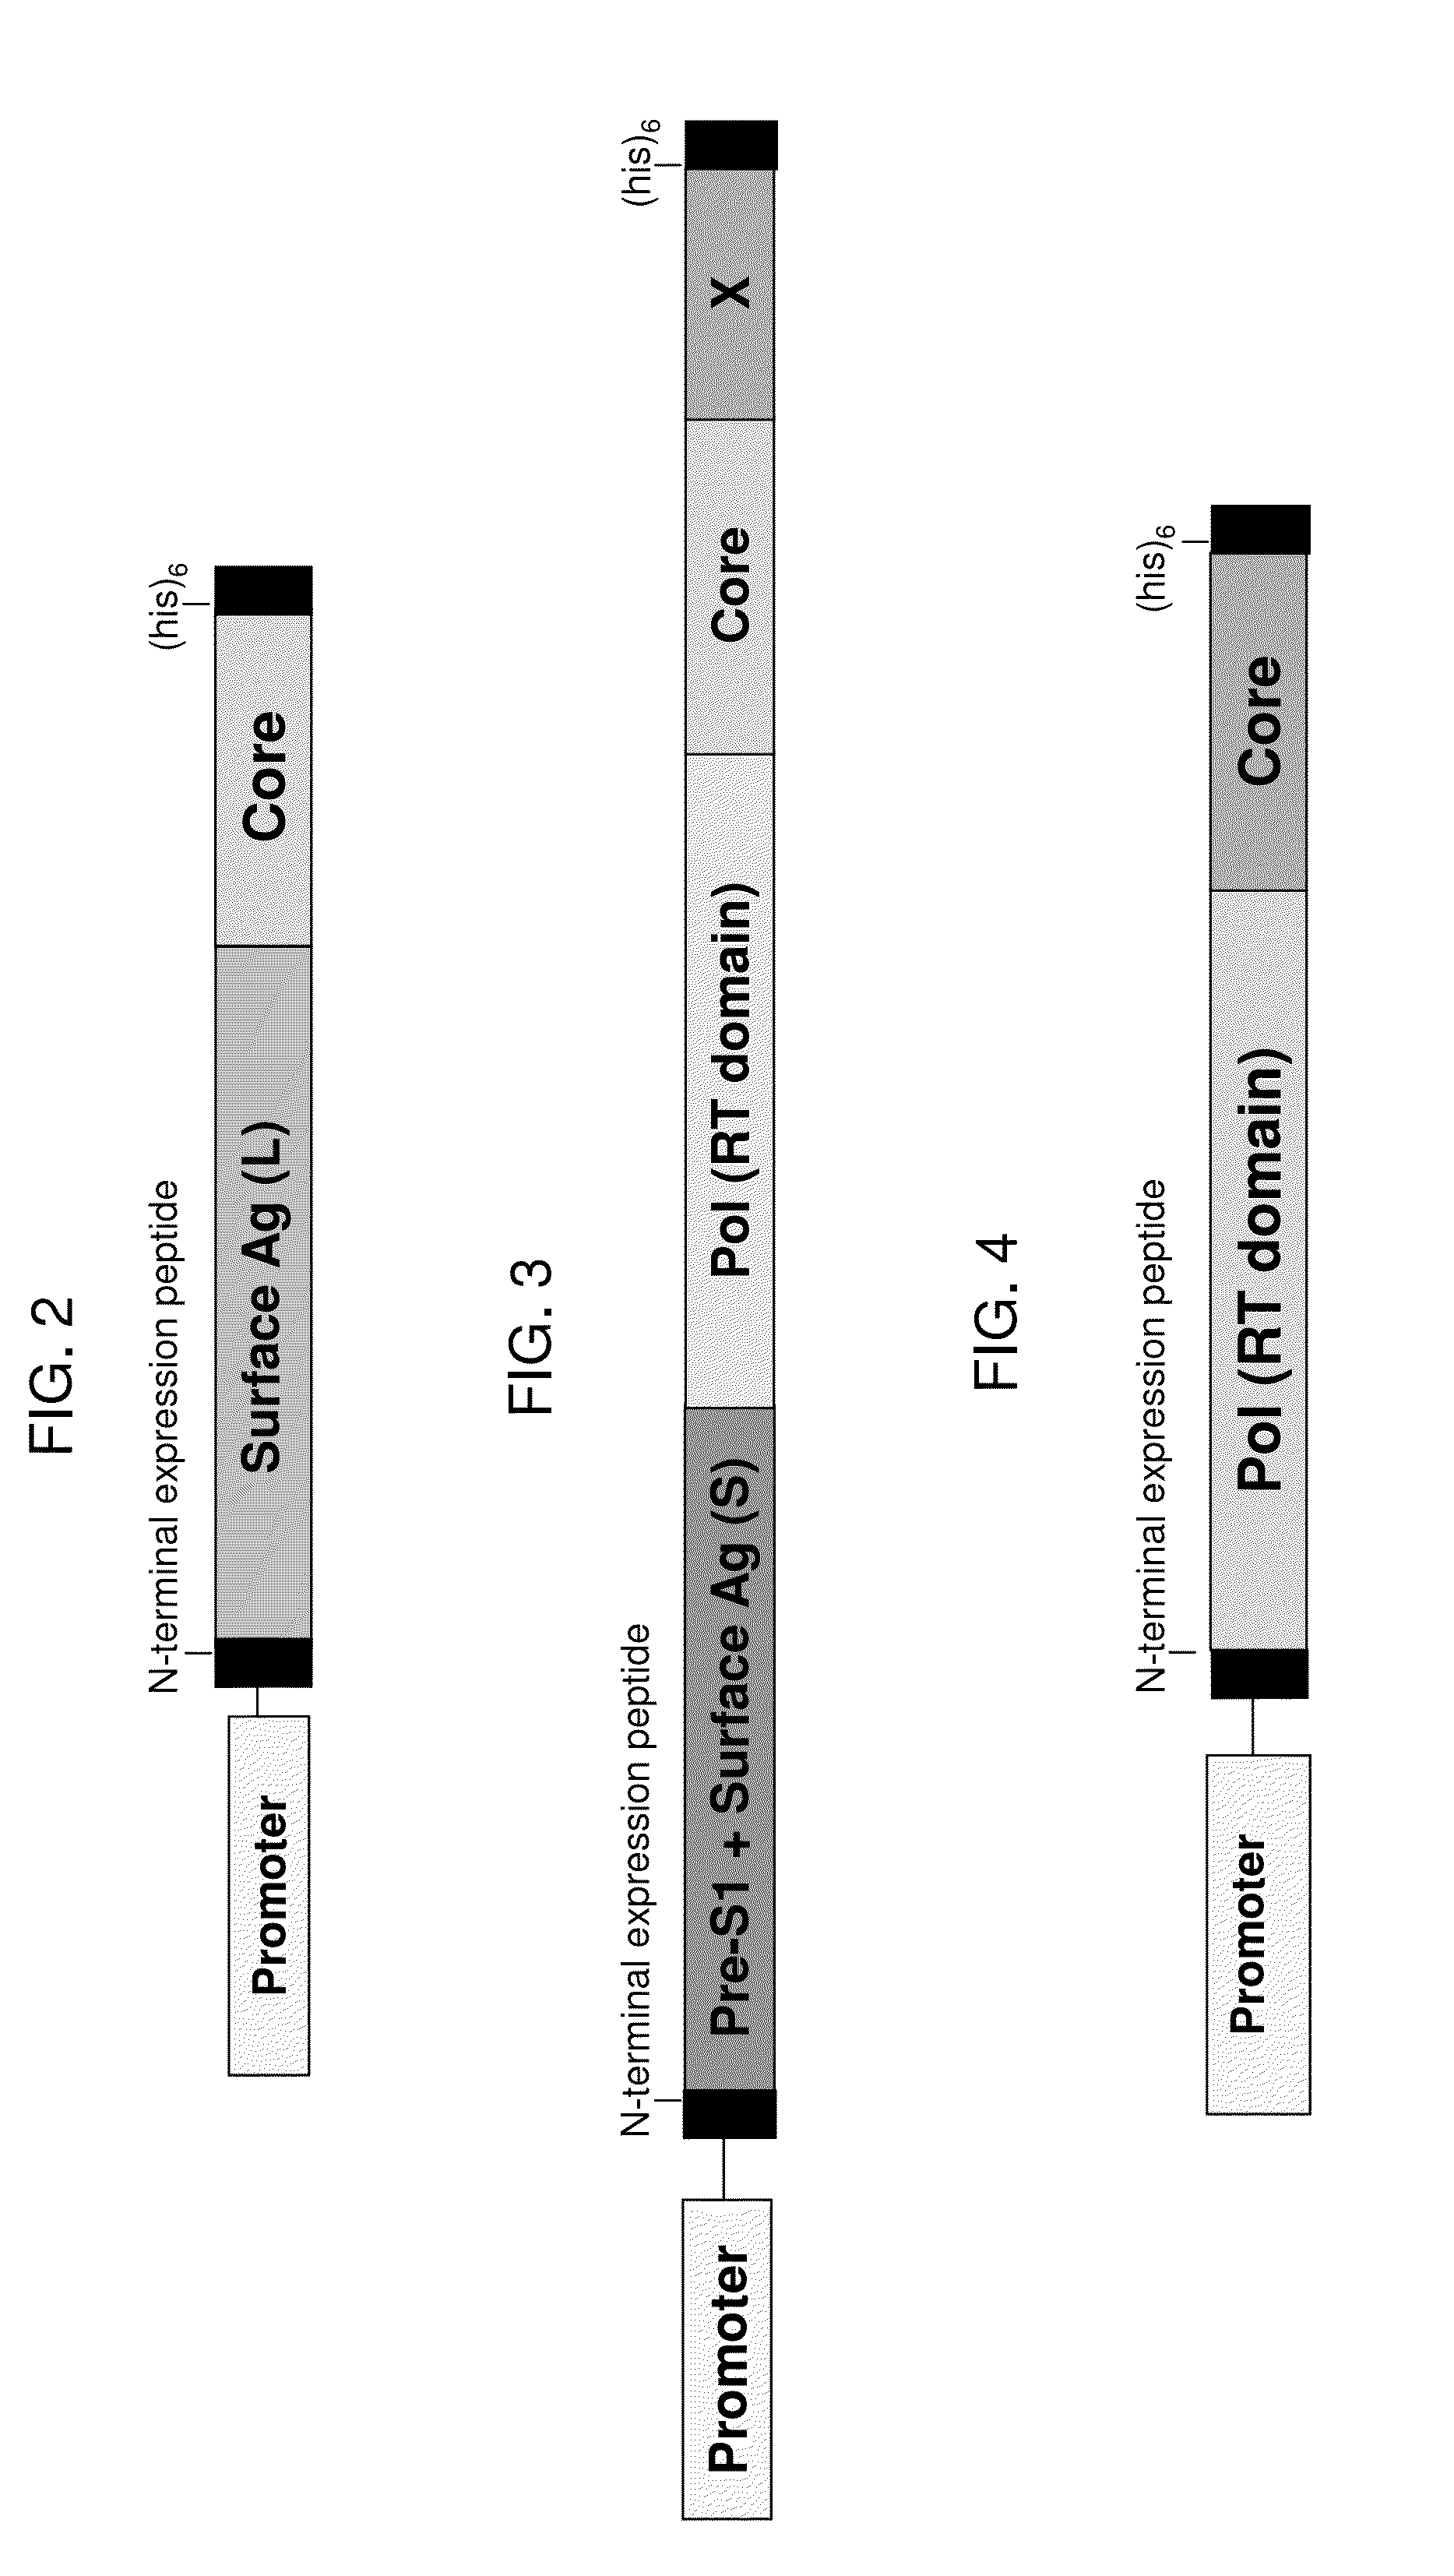 Compositions and Methods for the Treatment or Prevention of Hepatitis B Virus Infection